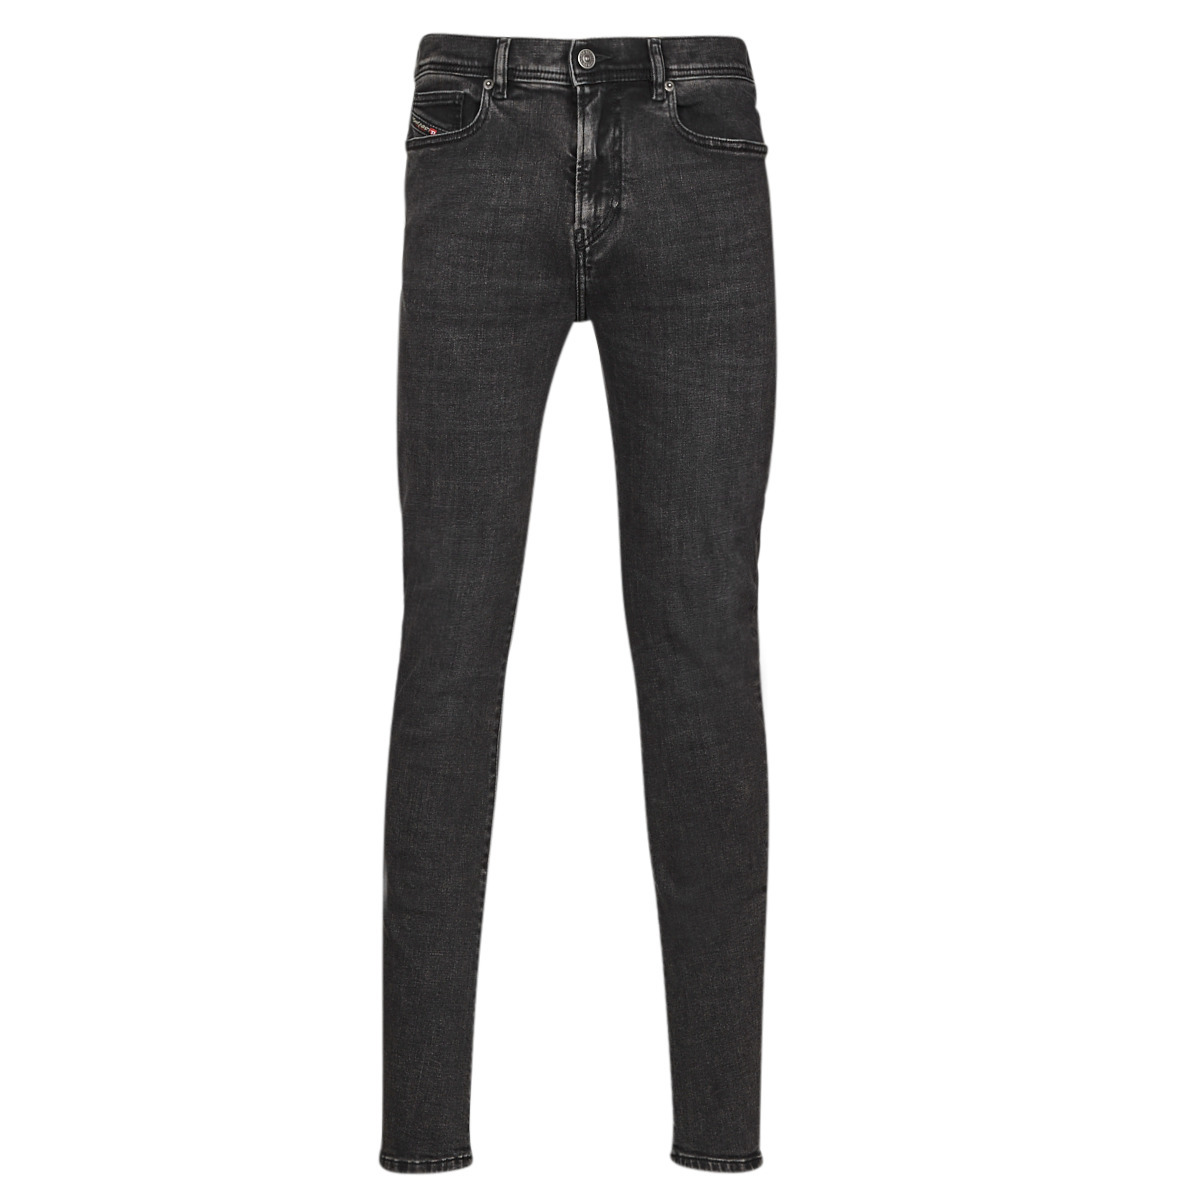 Mens Skinny Jeans Black from Spartoo GOOFASH